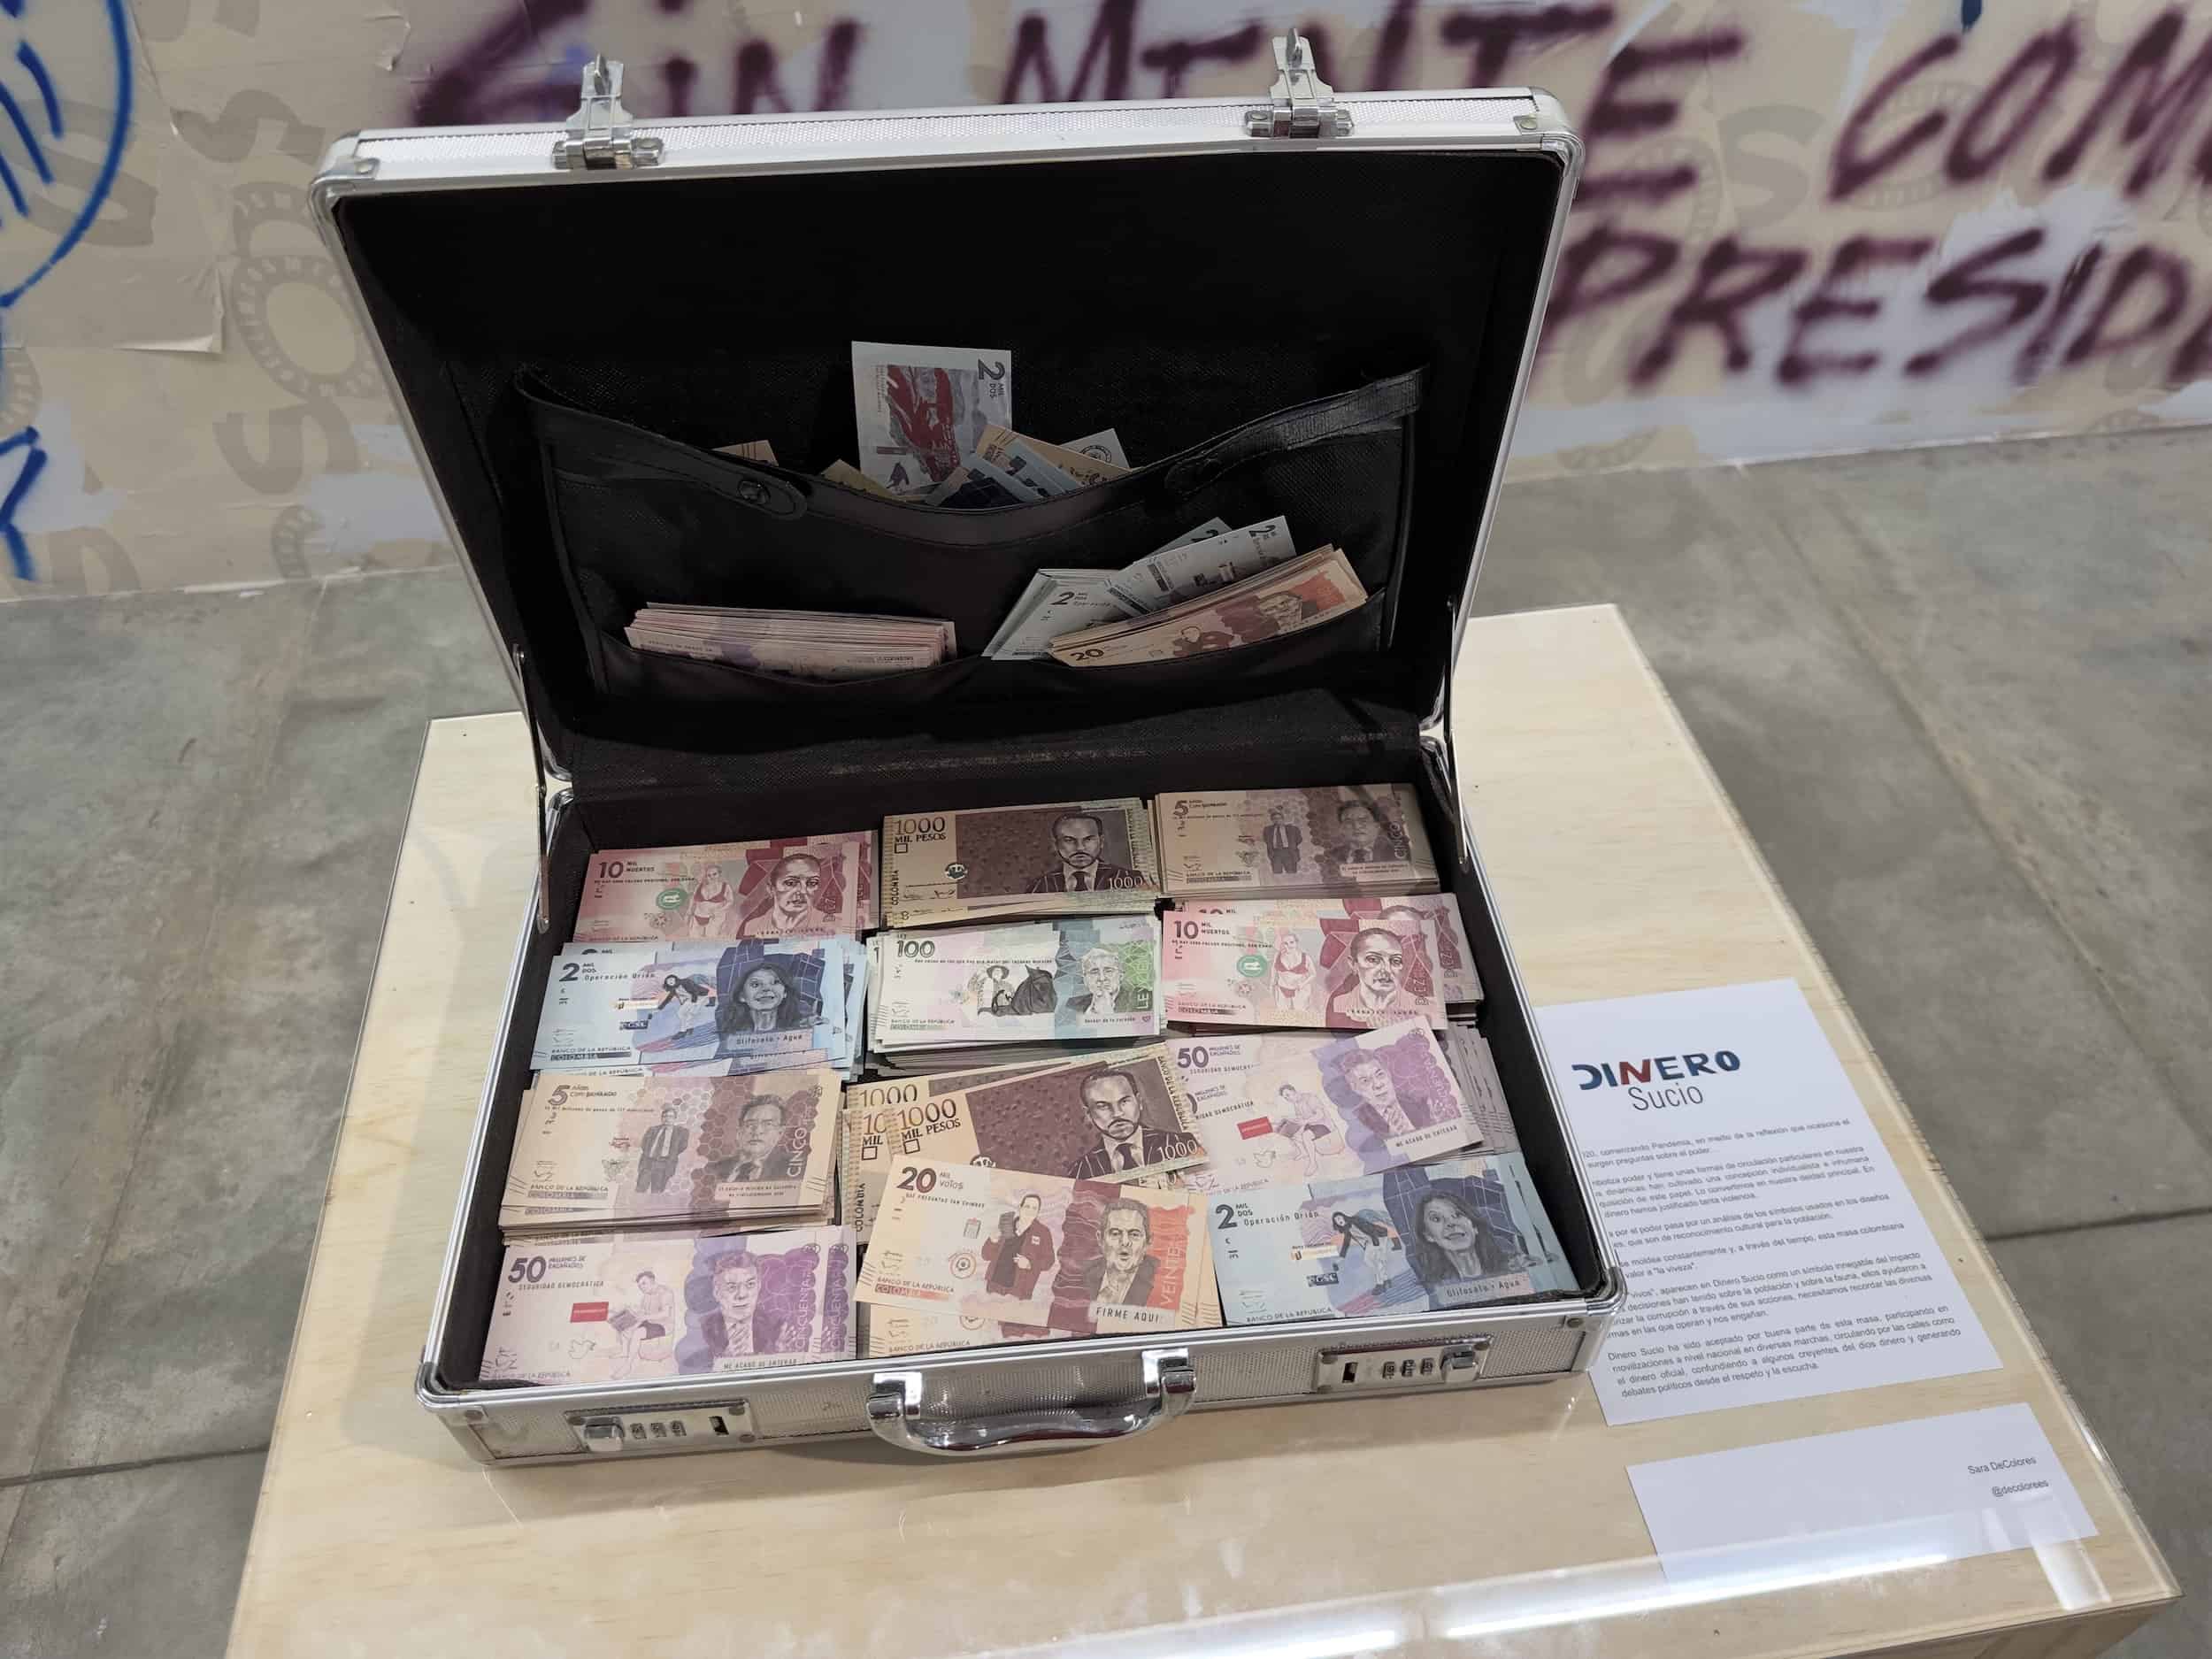 Briefcase full of "dirty money" with the faces of Colombian politicians in S.O.S. Medellín in Medellín, Pulse of the City at the Medellín Museum of Modern Art in Medellín, Antioquia, Colombia